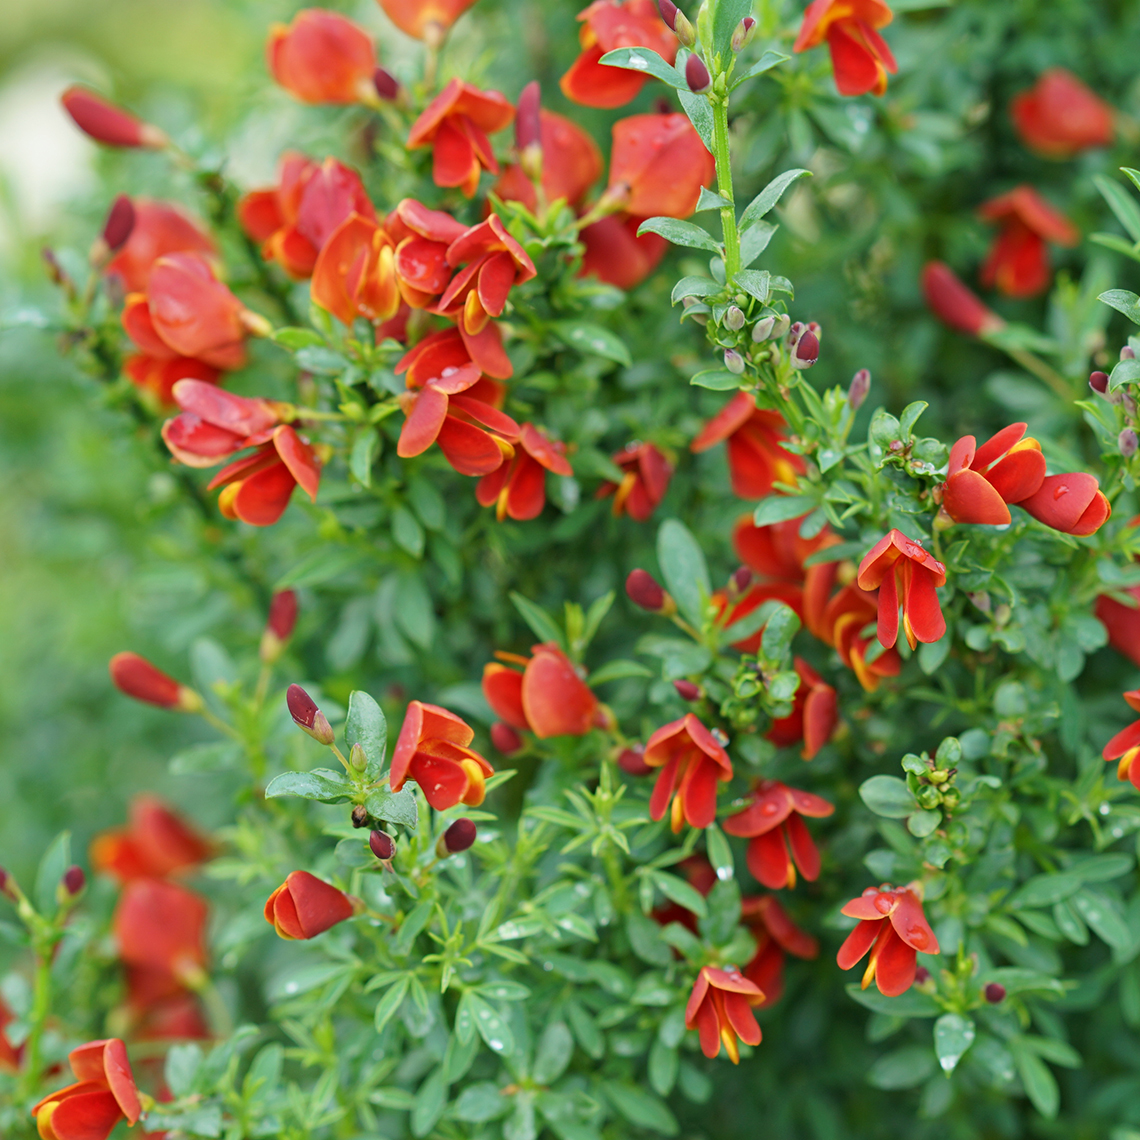 Close up of red Sister Redhead Cytisus flowers with yellow tips